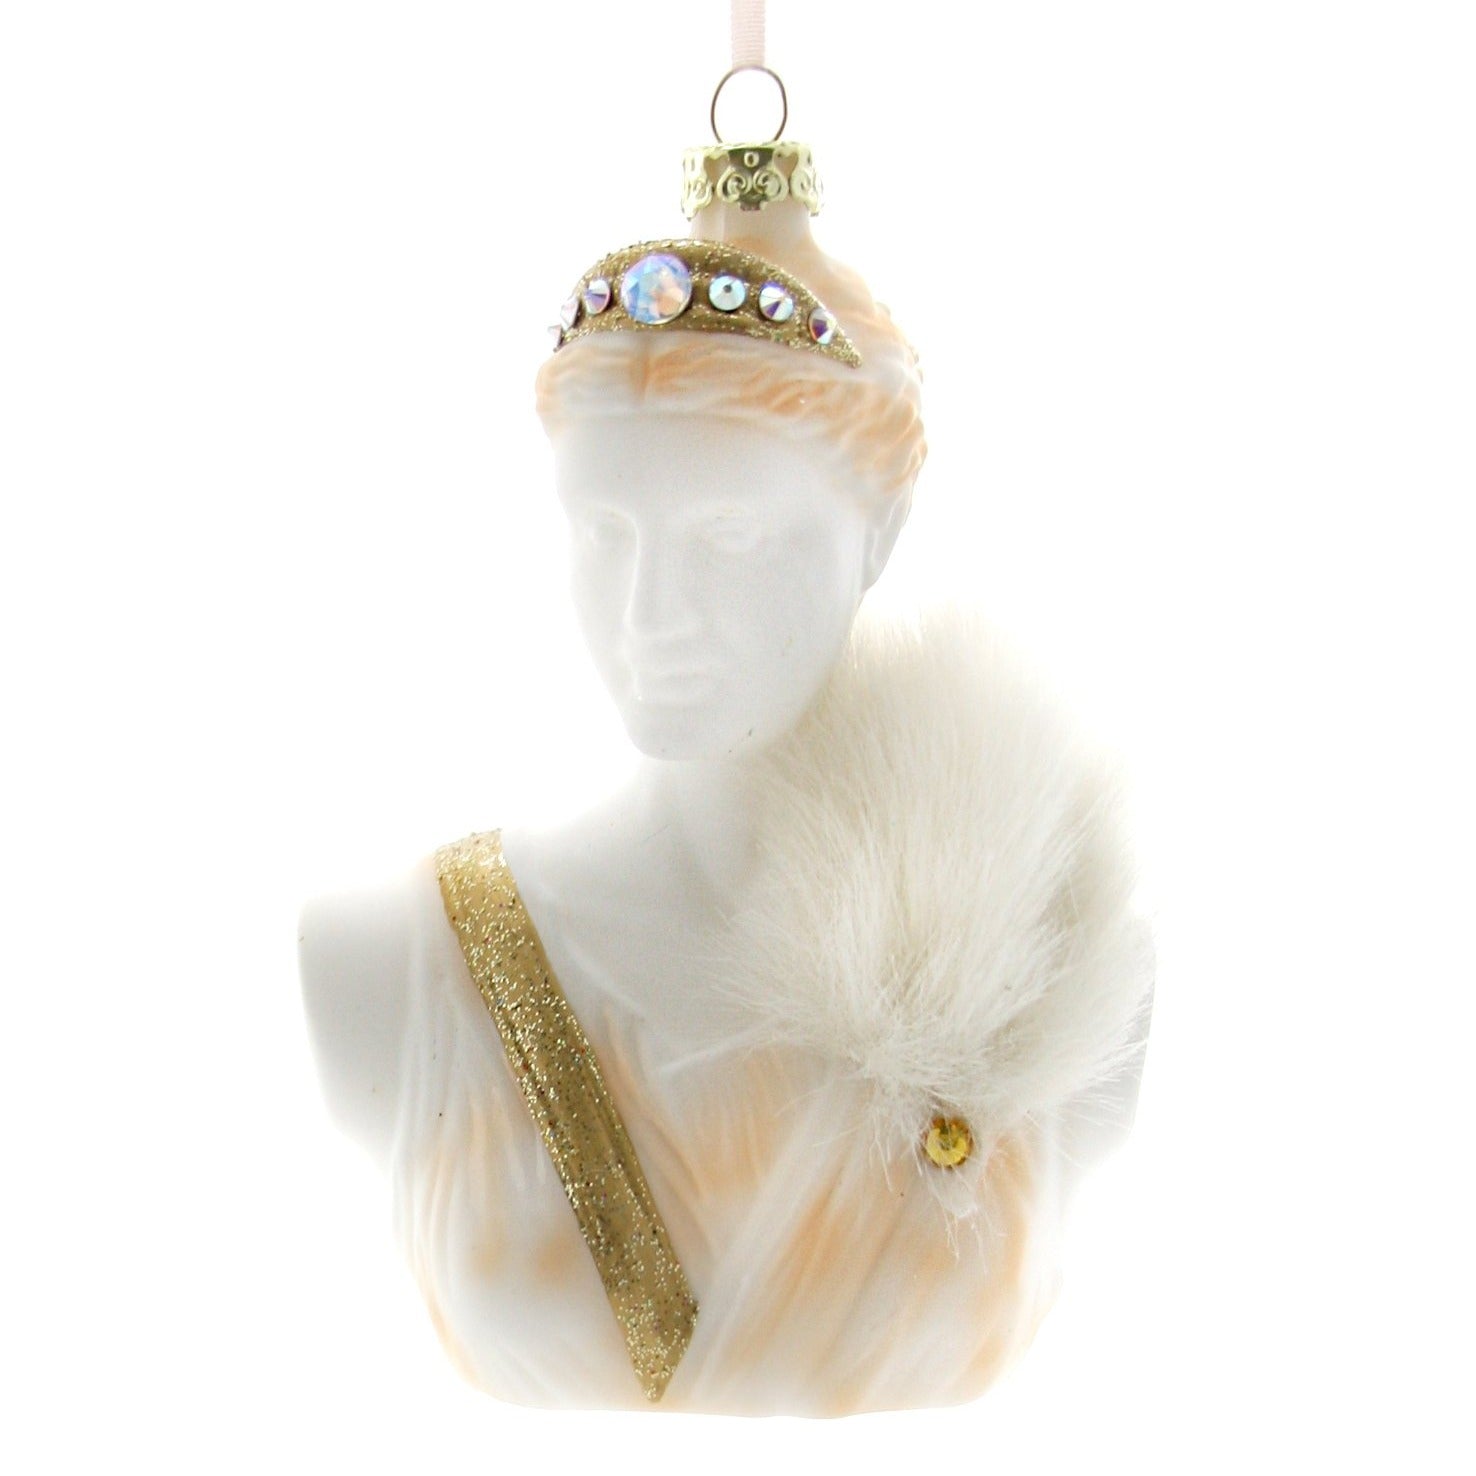 Glass holiday ornament of the goddess Artemis - available at scouthouse.com.au